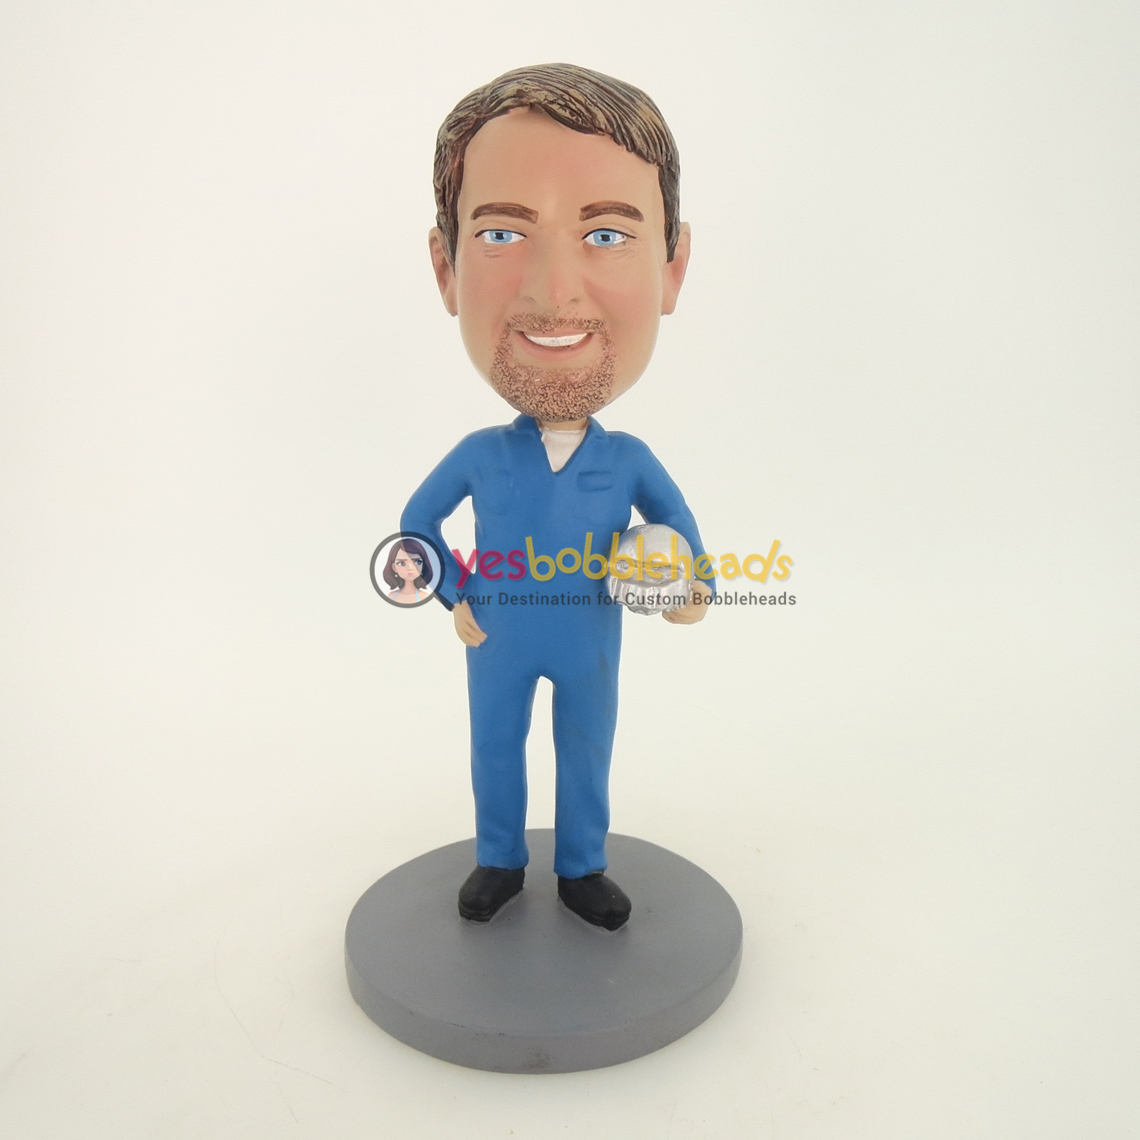 Picture of Custom Bobblehead Doll: Engineer Holding Protective Helmet